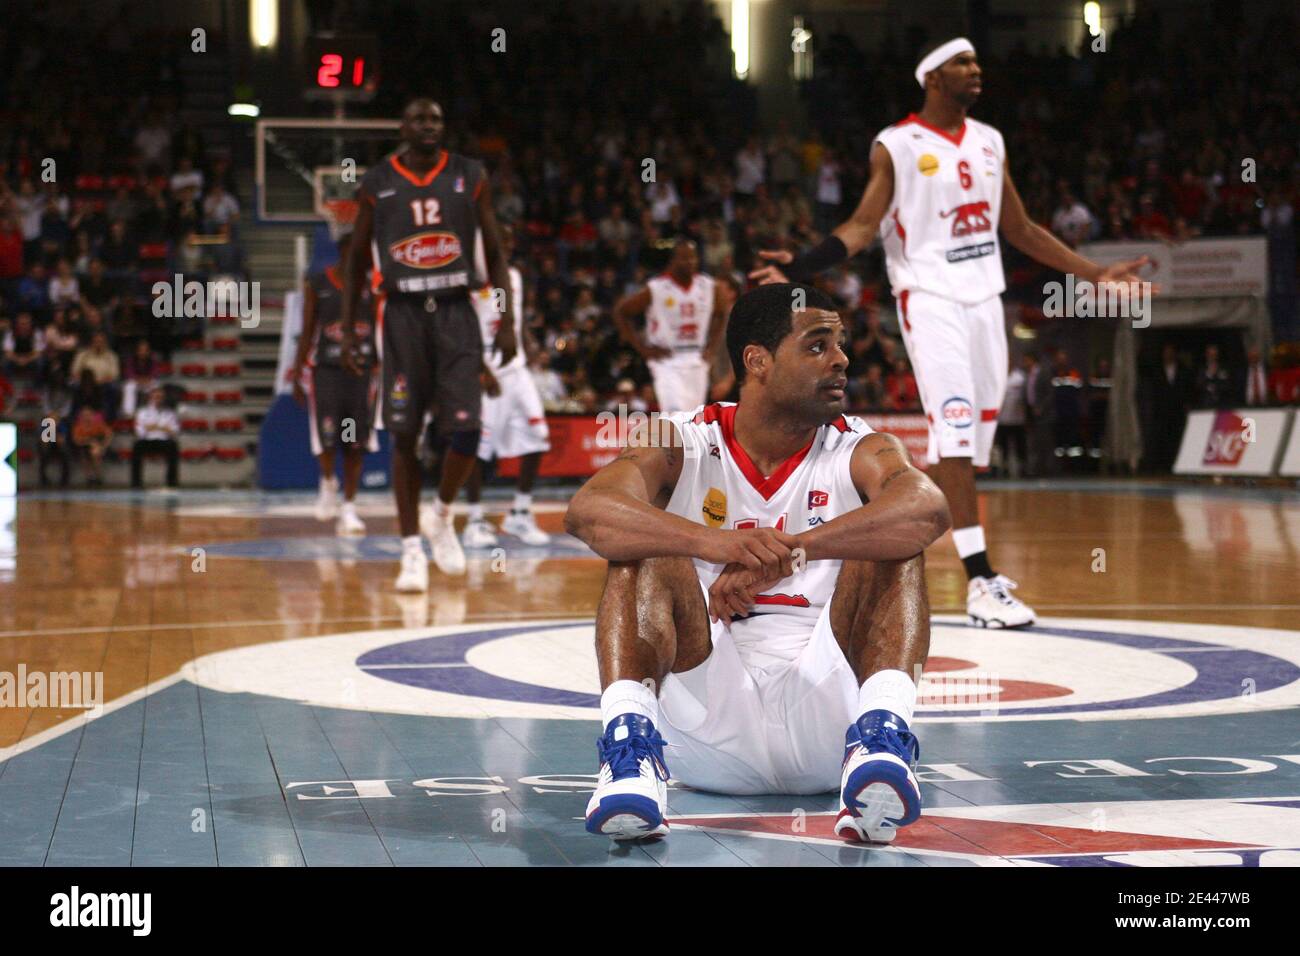 Nancy's Ricardo Greer during the French Pro A basketball match, SLUC Nancy  vs MSB Le Mans at Jean Weille Hall in Nancy, France on on April 24, 2009.  Photo by Mathieu Cugnot/ABACAPRESS.COM